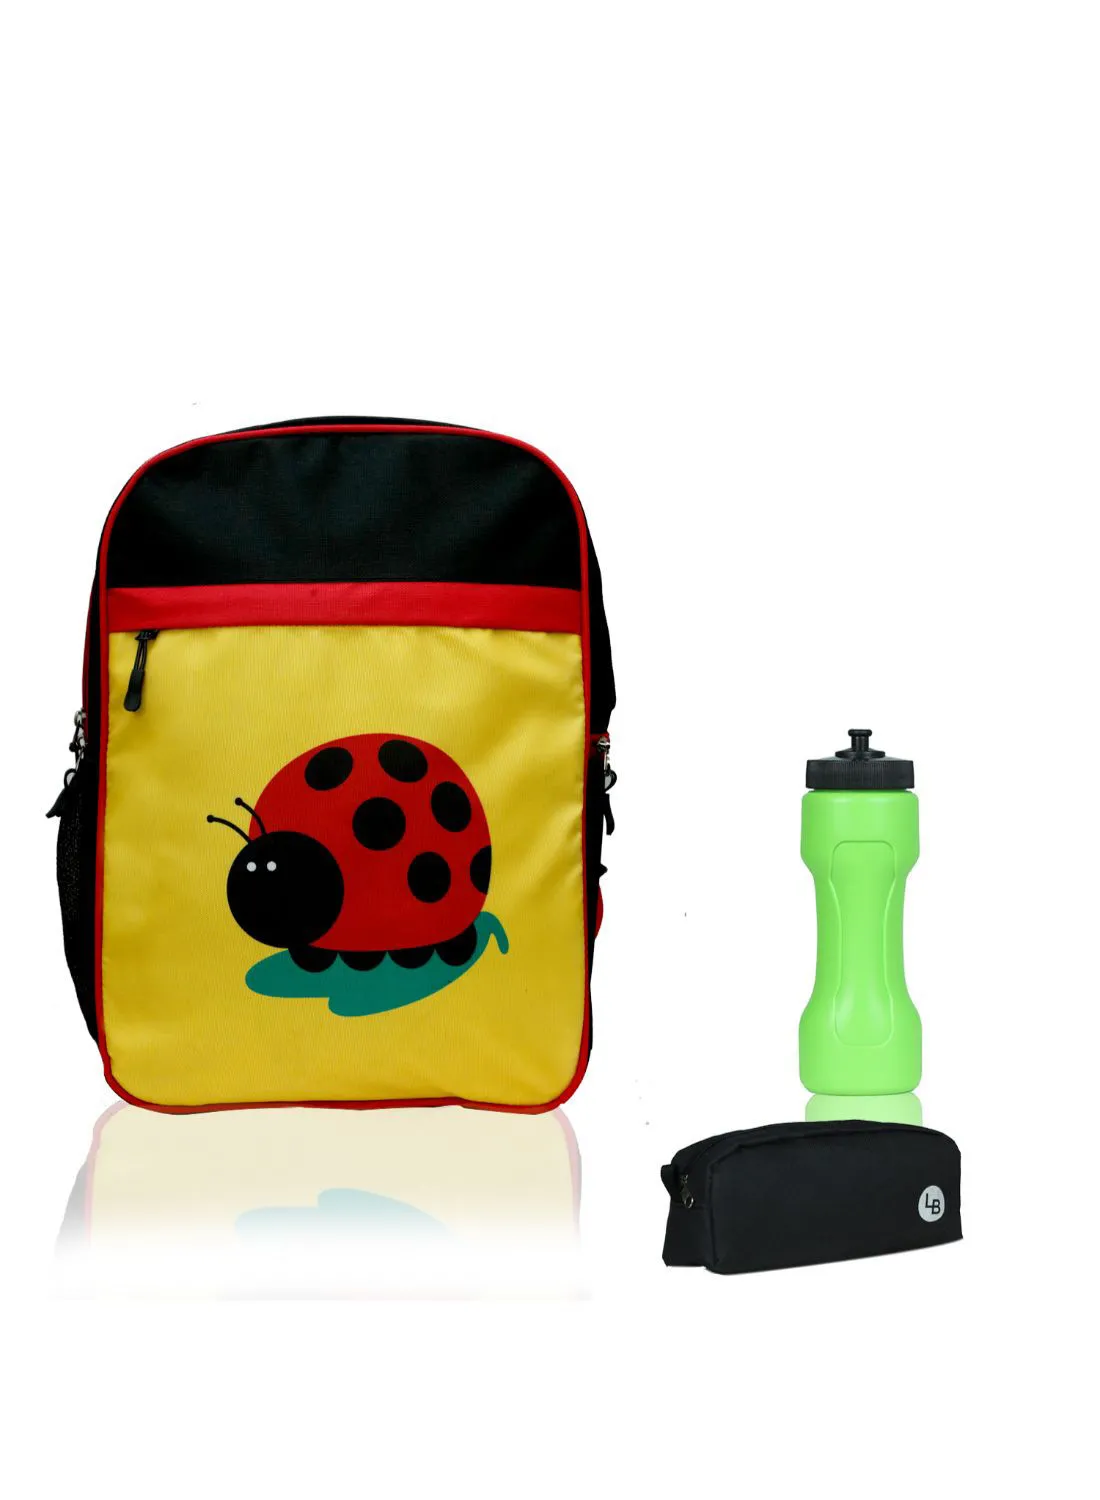 LIONBONE Ladybug Printed Polyester Kids Backpack with zip closure Ideal for 4-6 years age group, Plastic Sipper And Polyester Pouch Yellow-Black